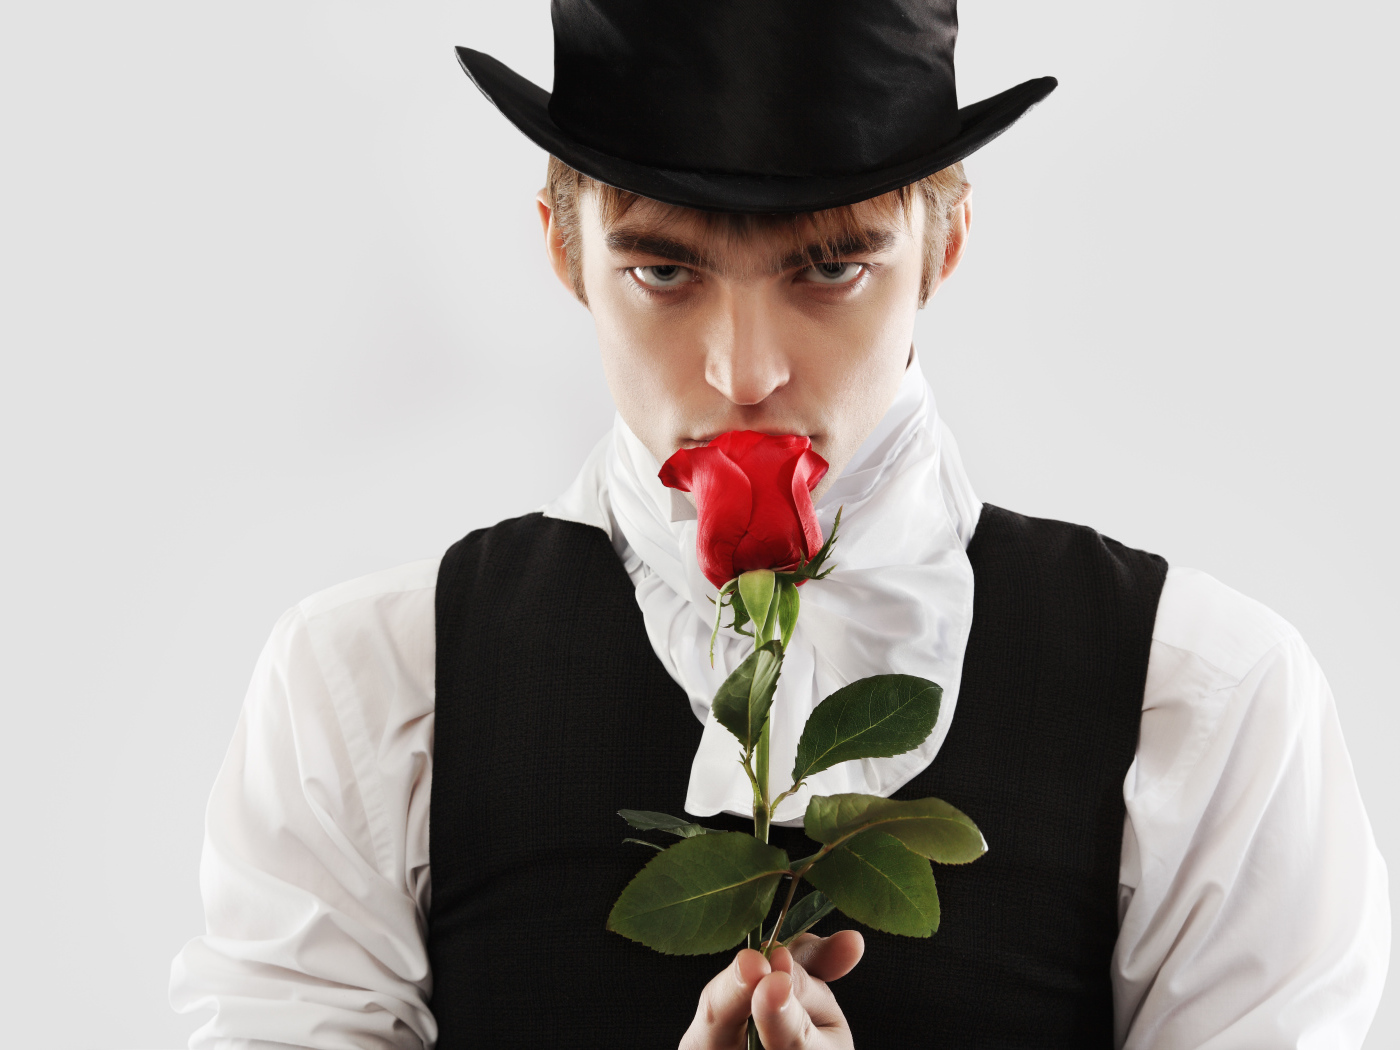 Guy in a top hat with a red rose in his hand on a gray background